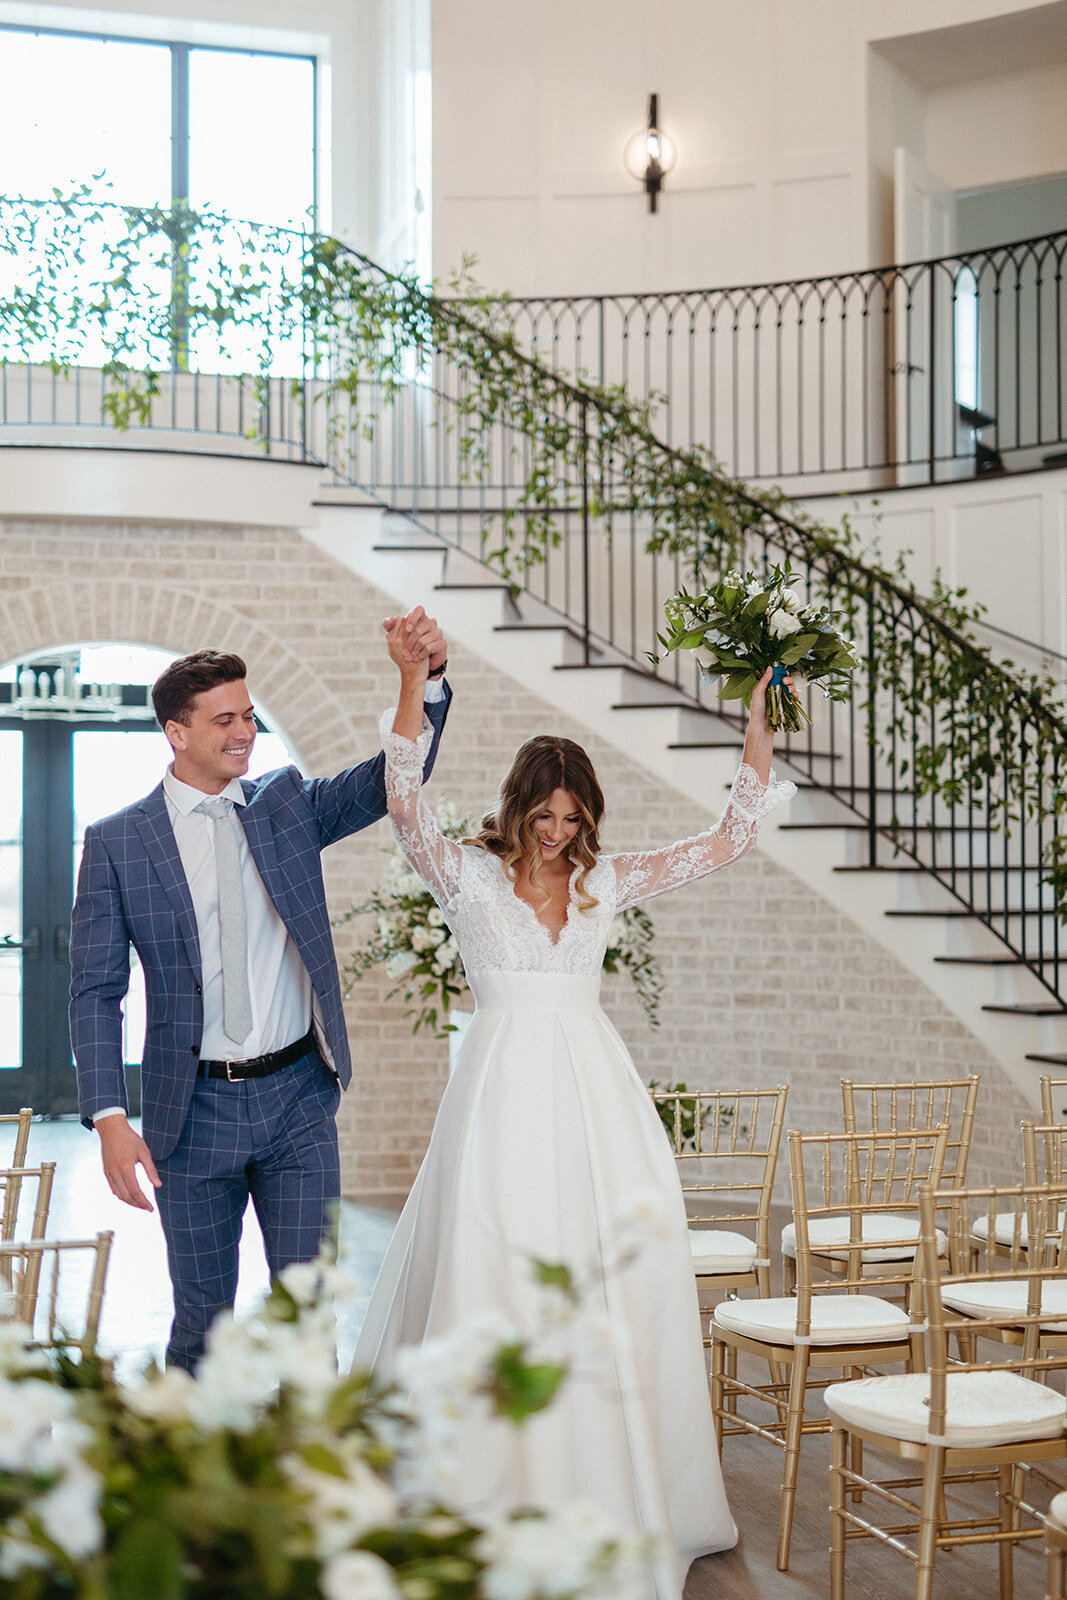 Bride and groom in a blue suit and white wedding gown walking down an aisle of gold chairs with a staircase behind.